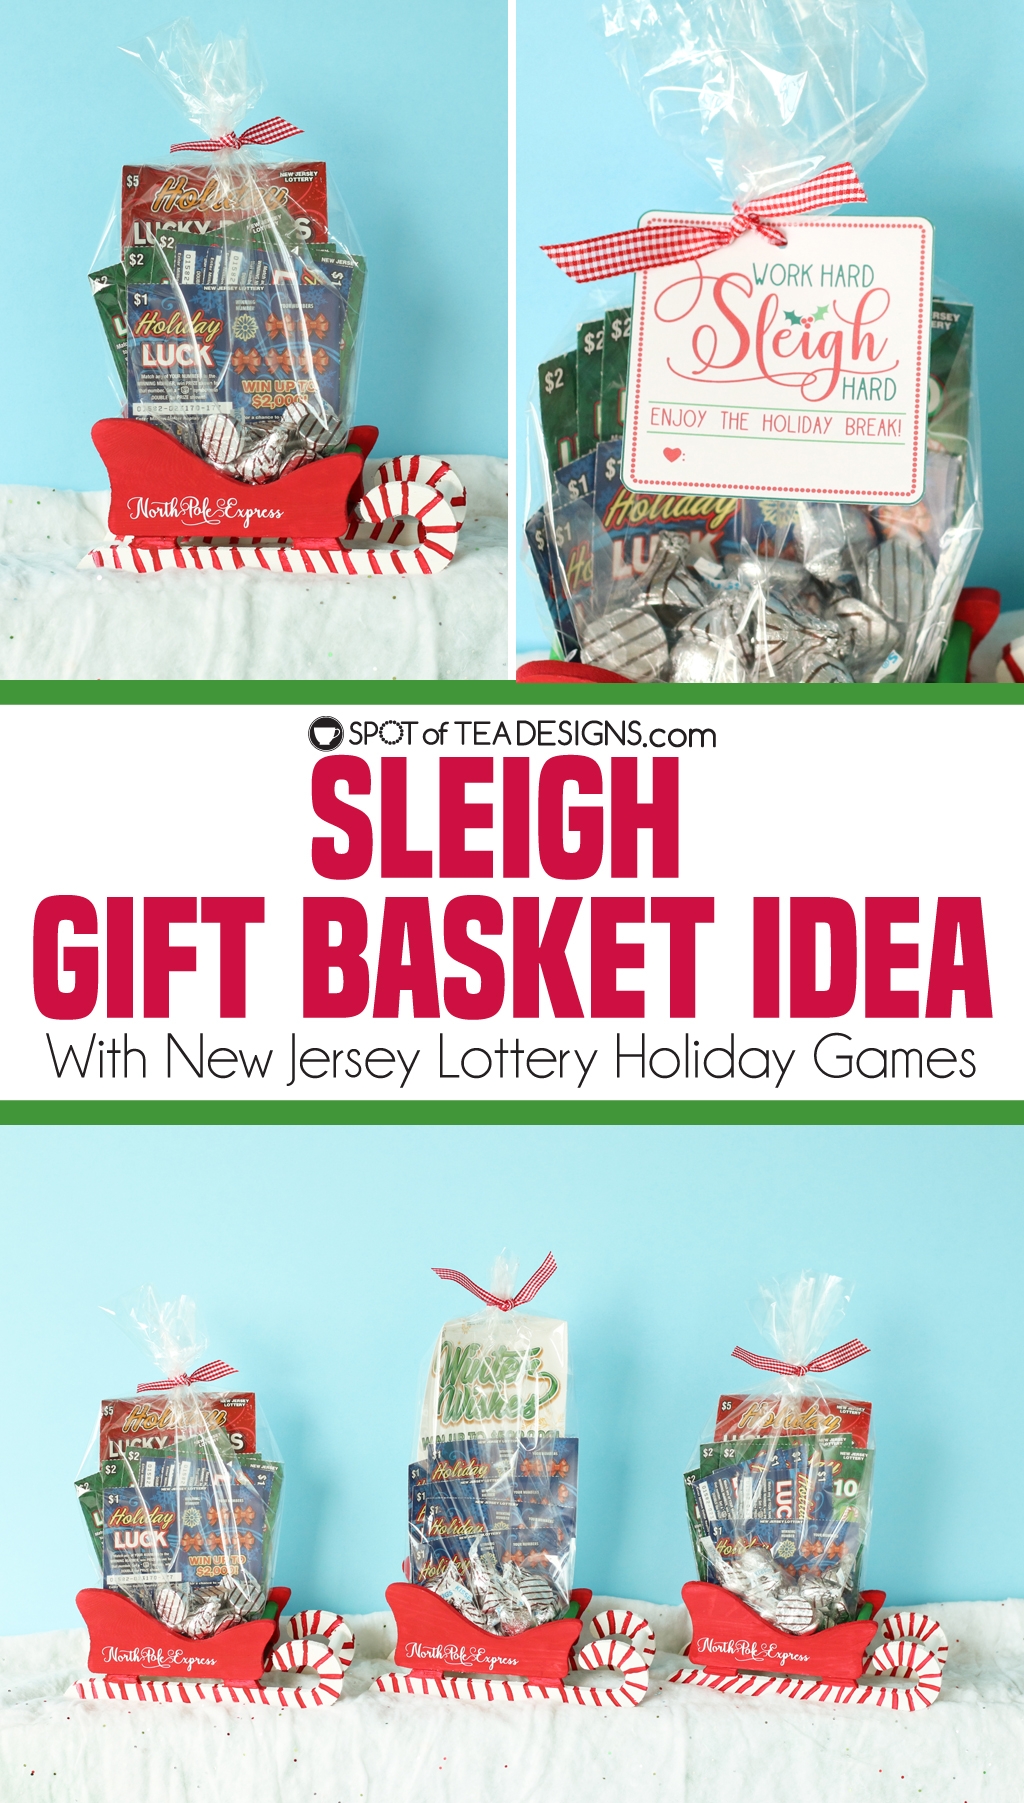 Sleigh Christmas Gift Basket with New Jersey Lottery Holiday Games